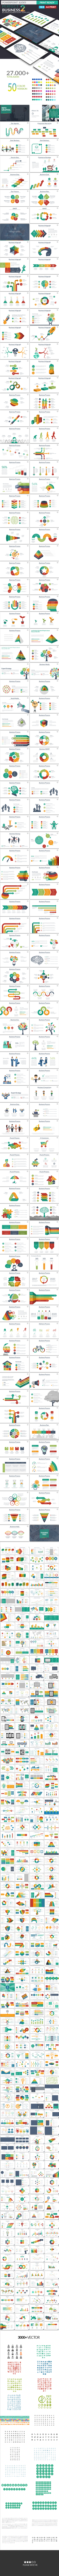 Perfect Business PowerPoint Template 2